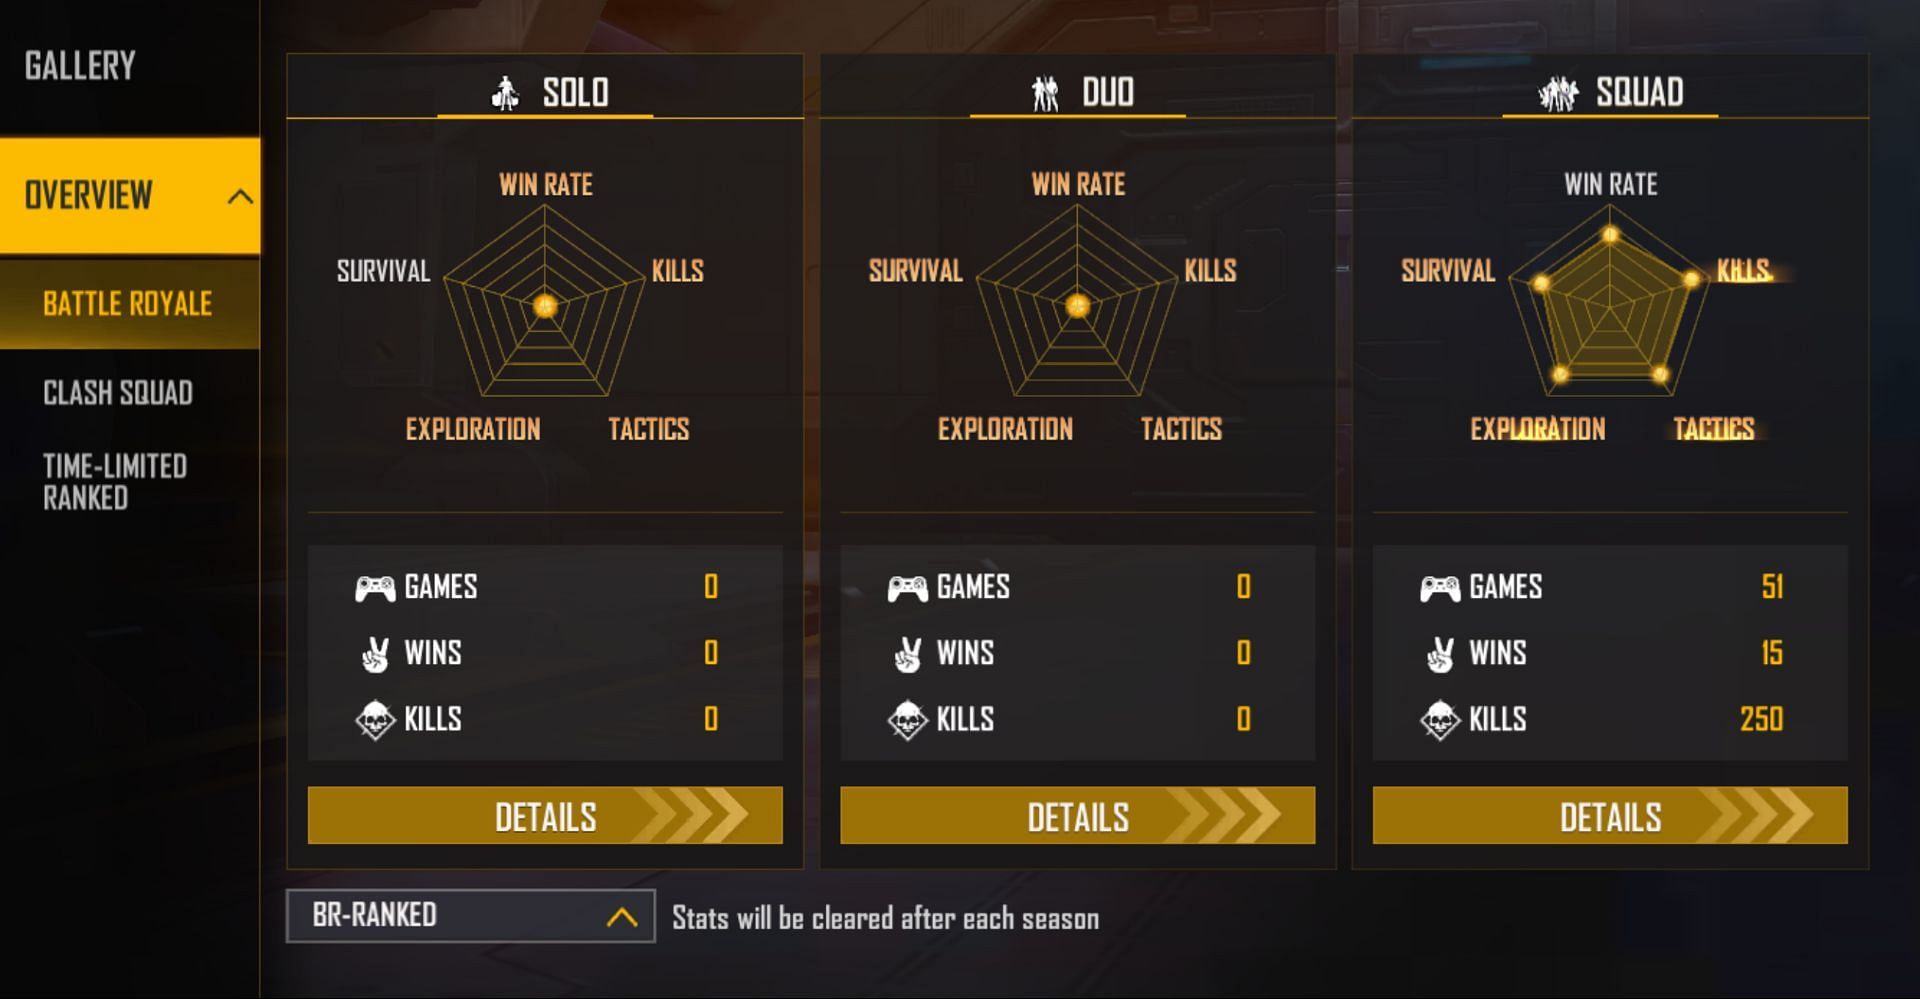 UnGraduate Gamer has not played solo and duo matches (Image via Garena)